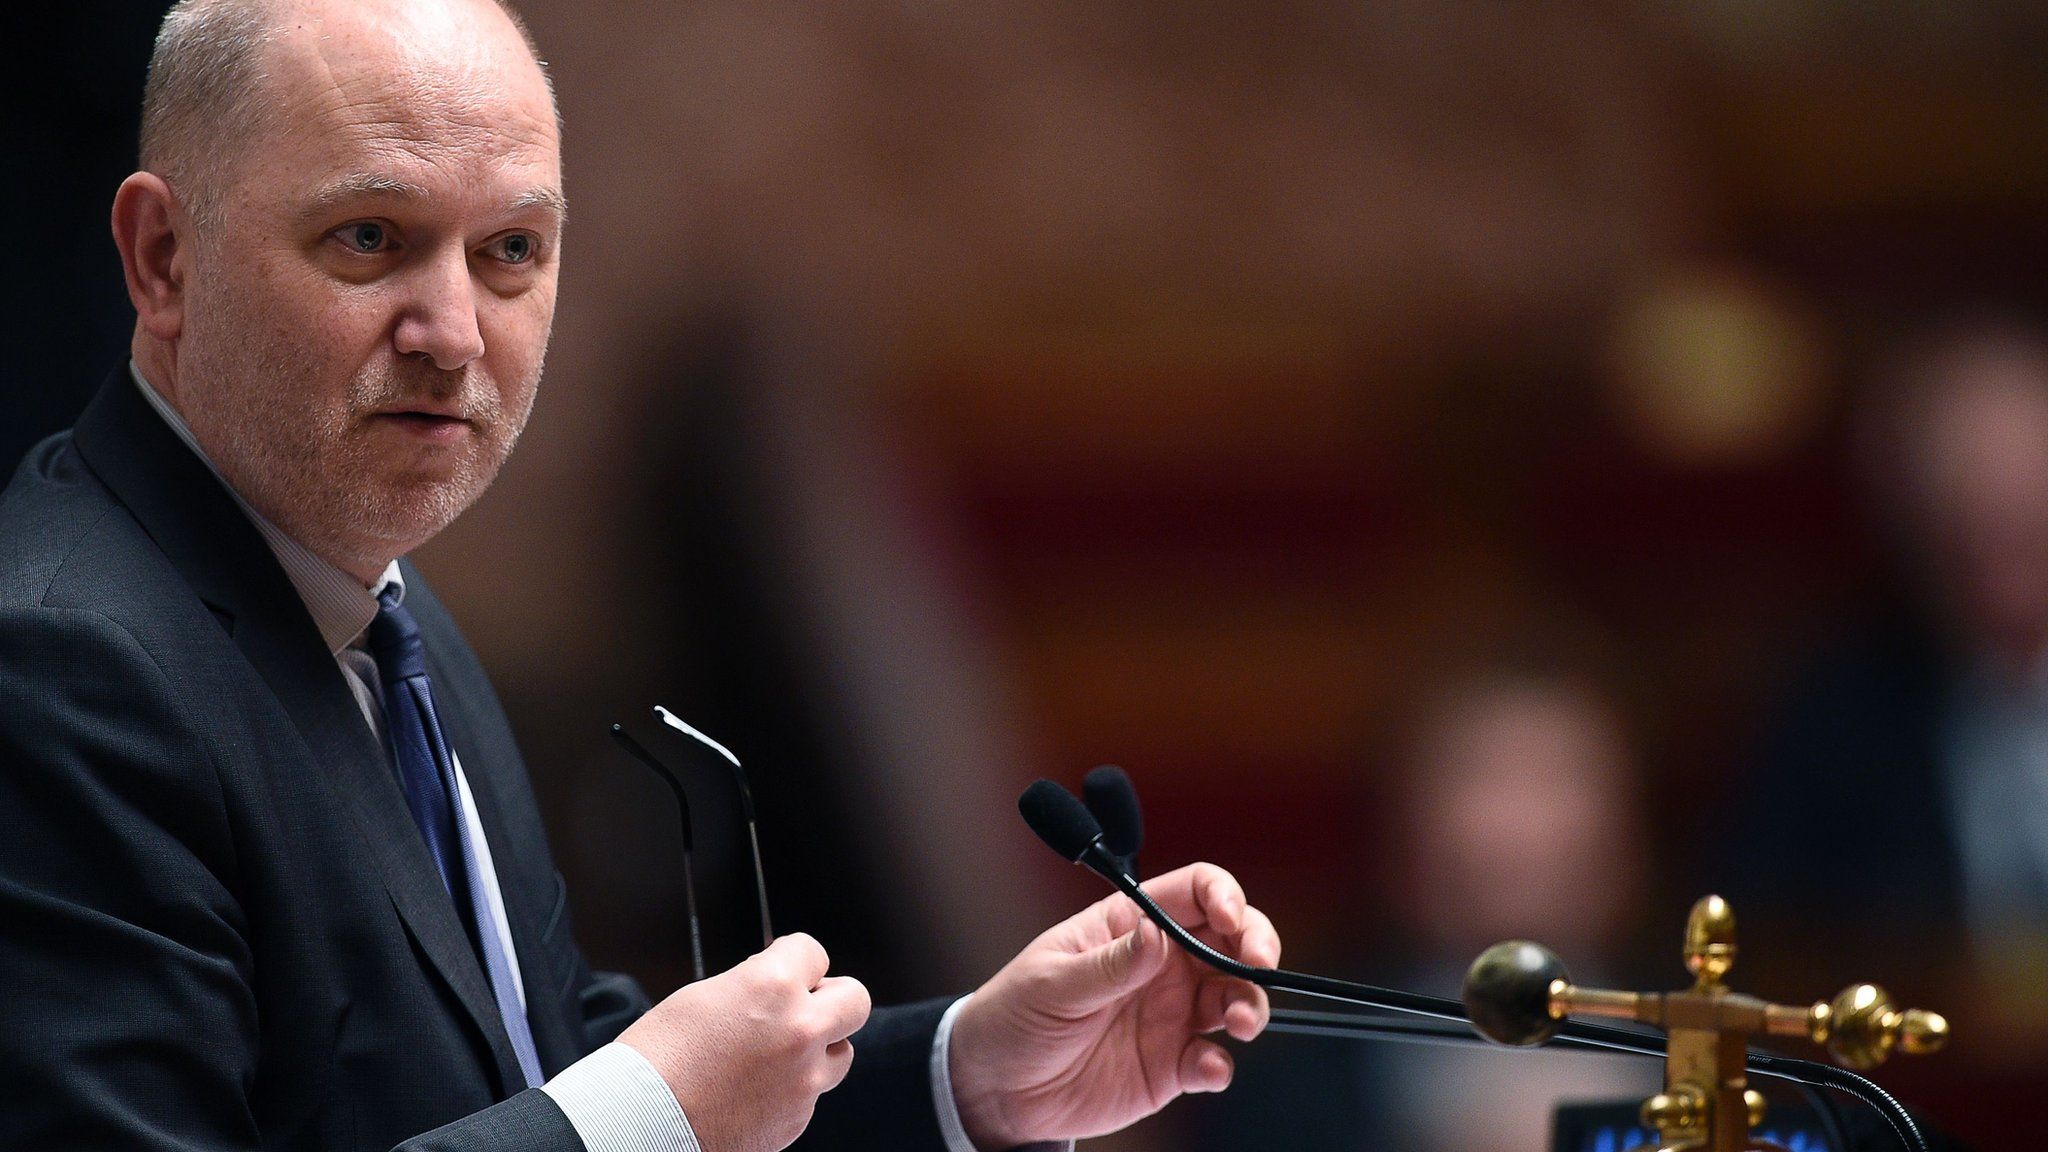 Denis Baupin attending a session of questions to the Government at the French National Assembly in Paris (December 2015)